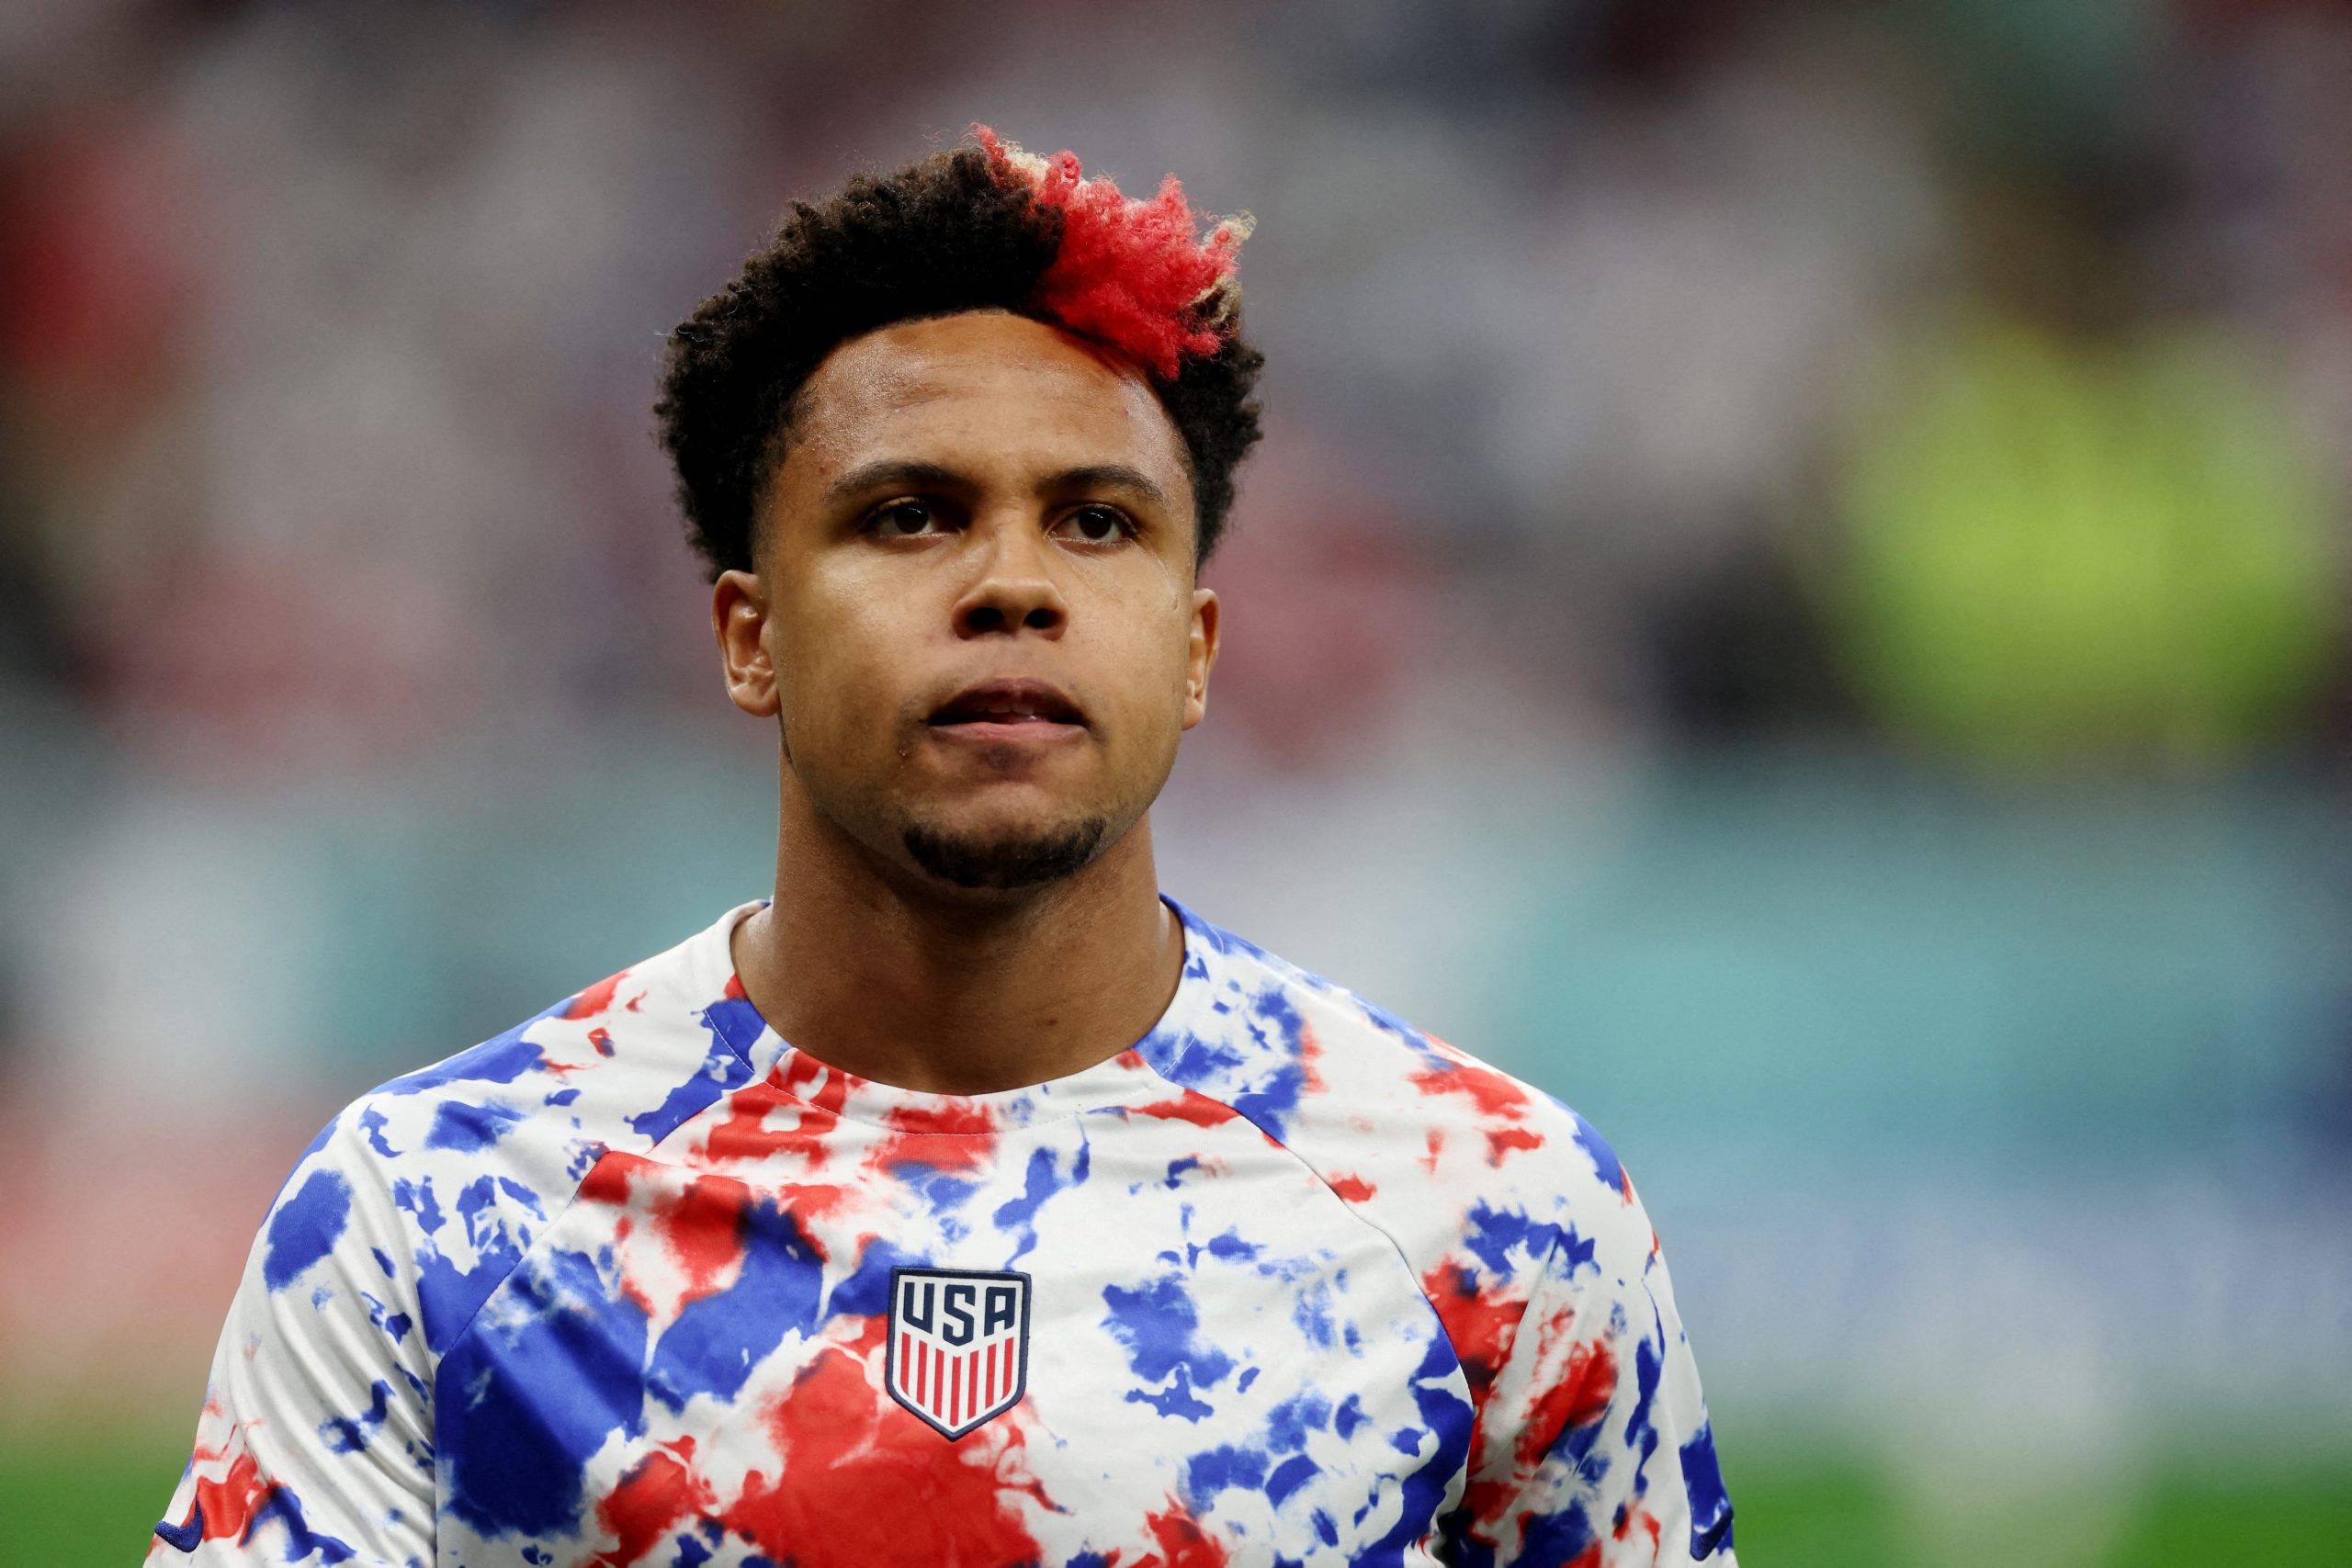 Leeds: Weston McKennie drawing interest from rival suitors - Follow up